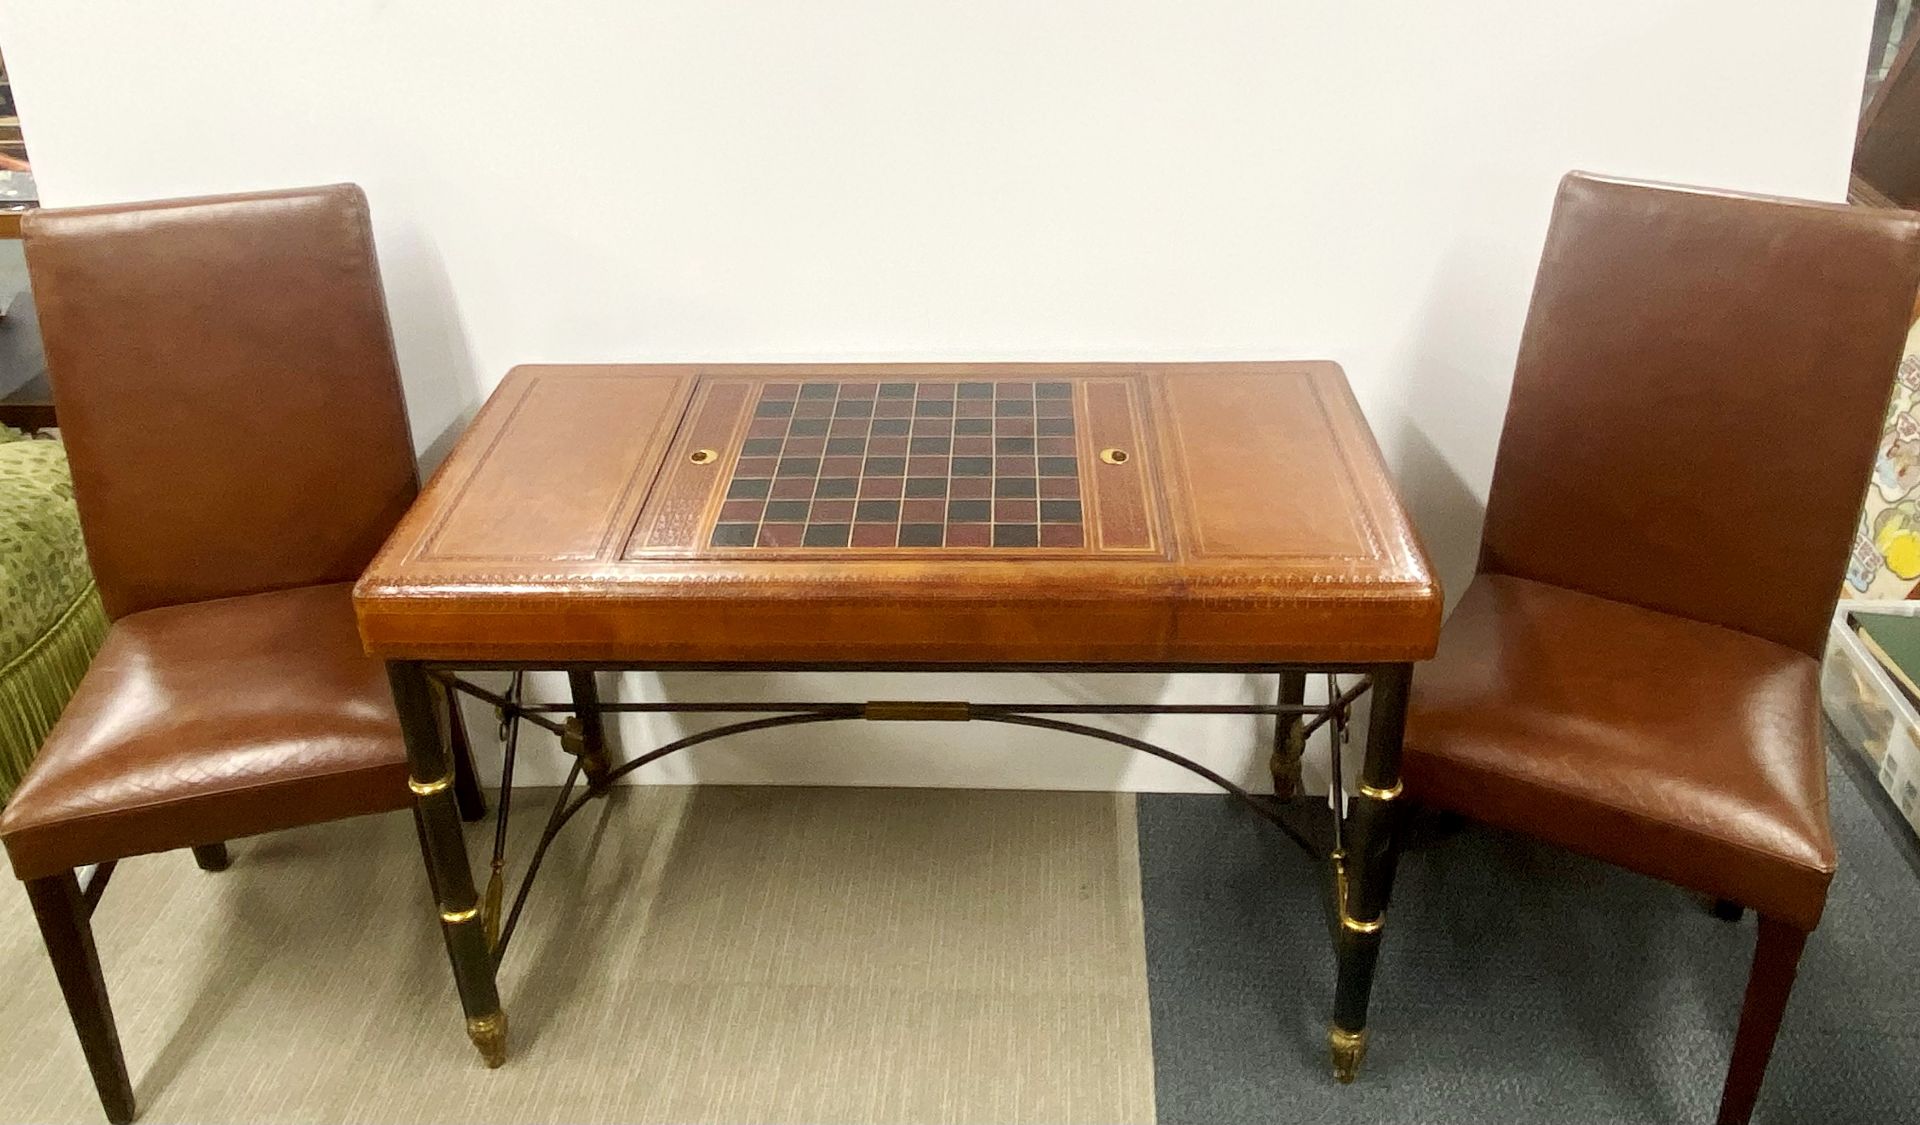 A lovely leather covered iron and brass framed chess and backgammon table, 111 x 73 x 55cm